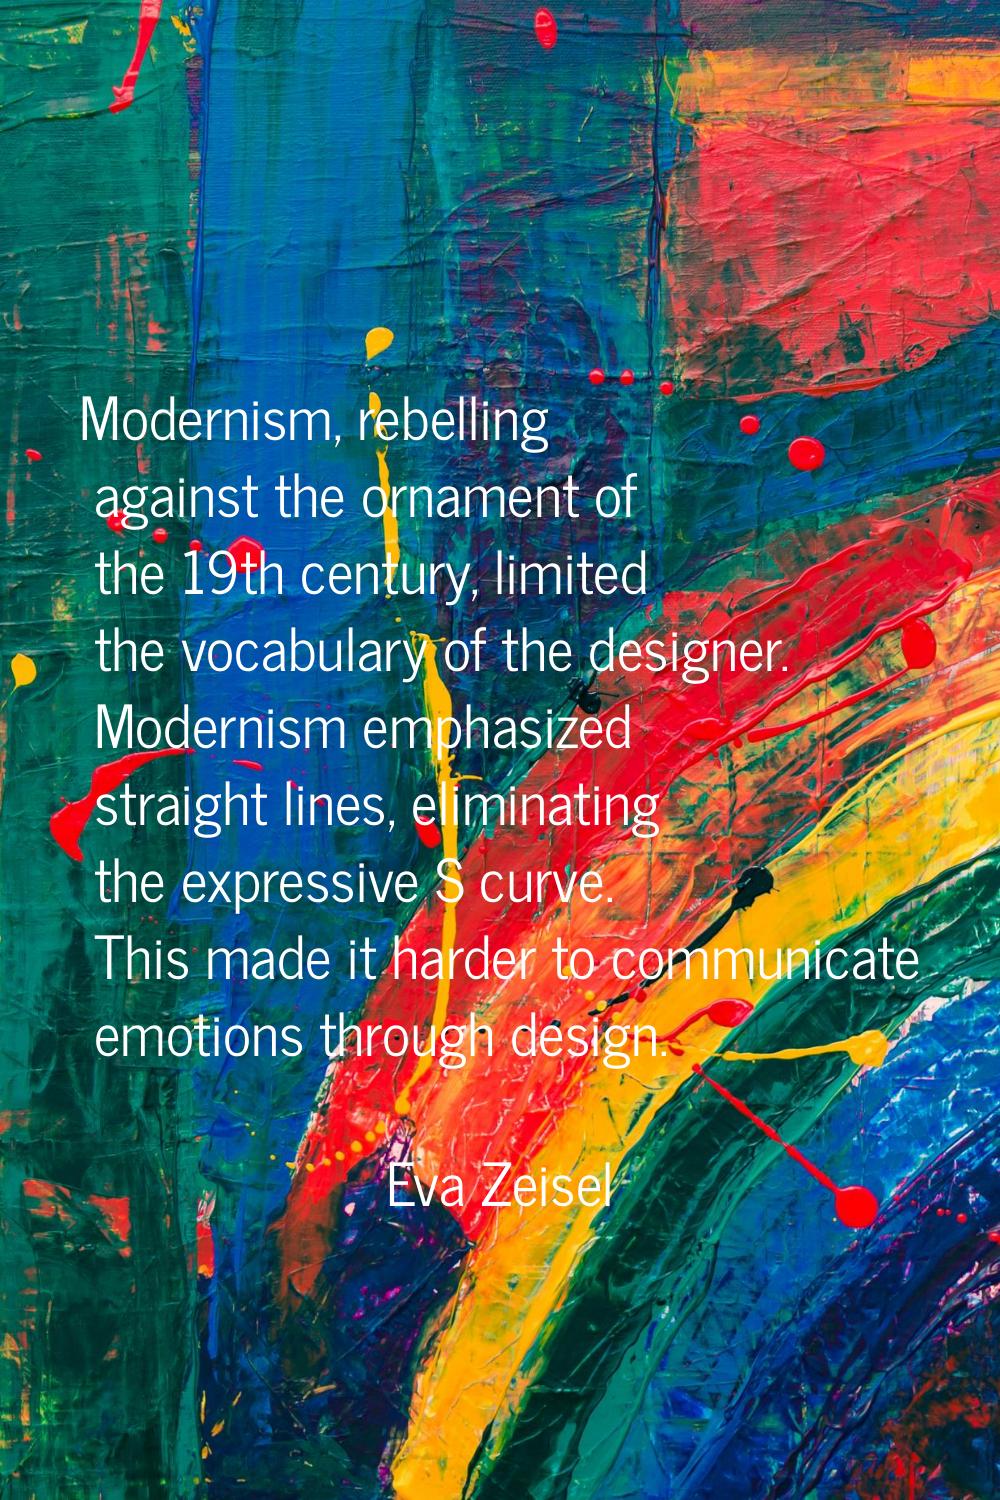 Modernism, rebelling against the ornament of the 19th century, limited the vocabulary of the design